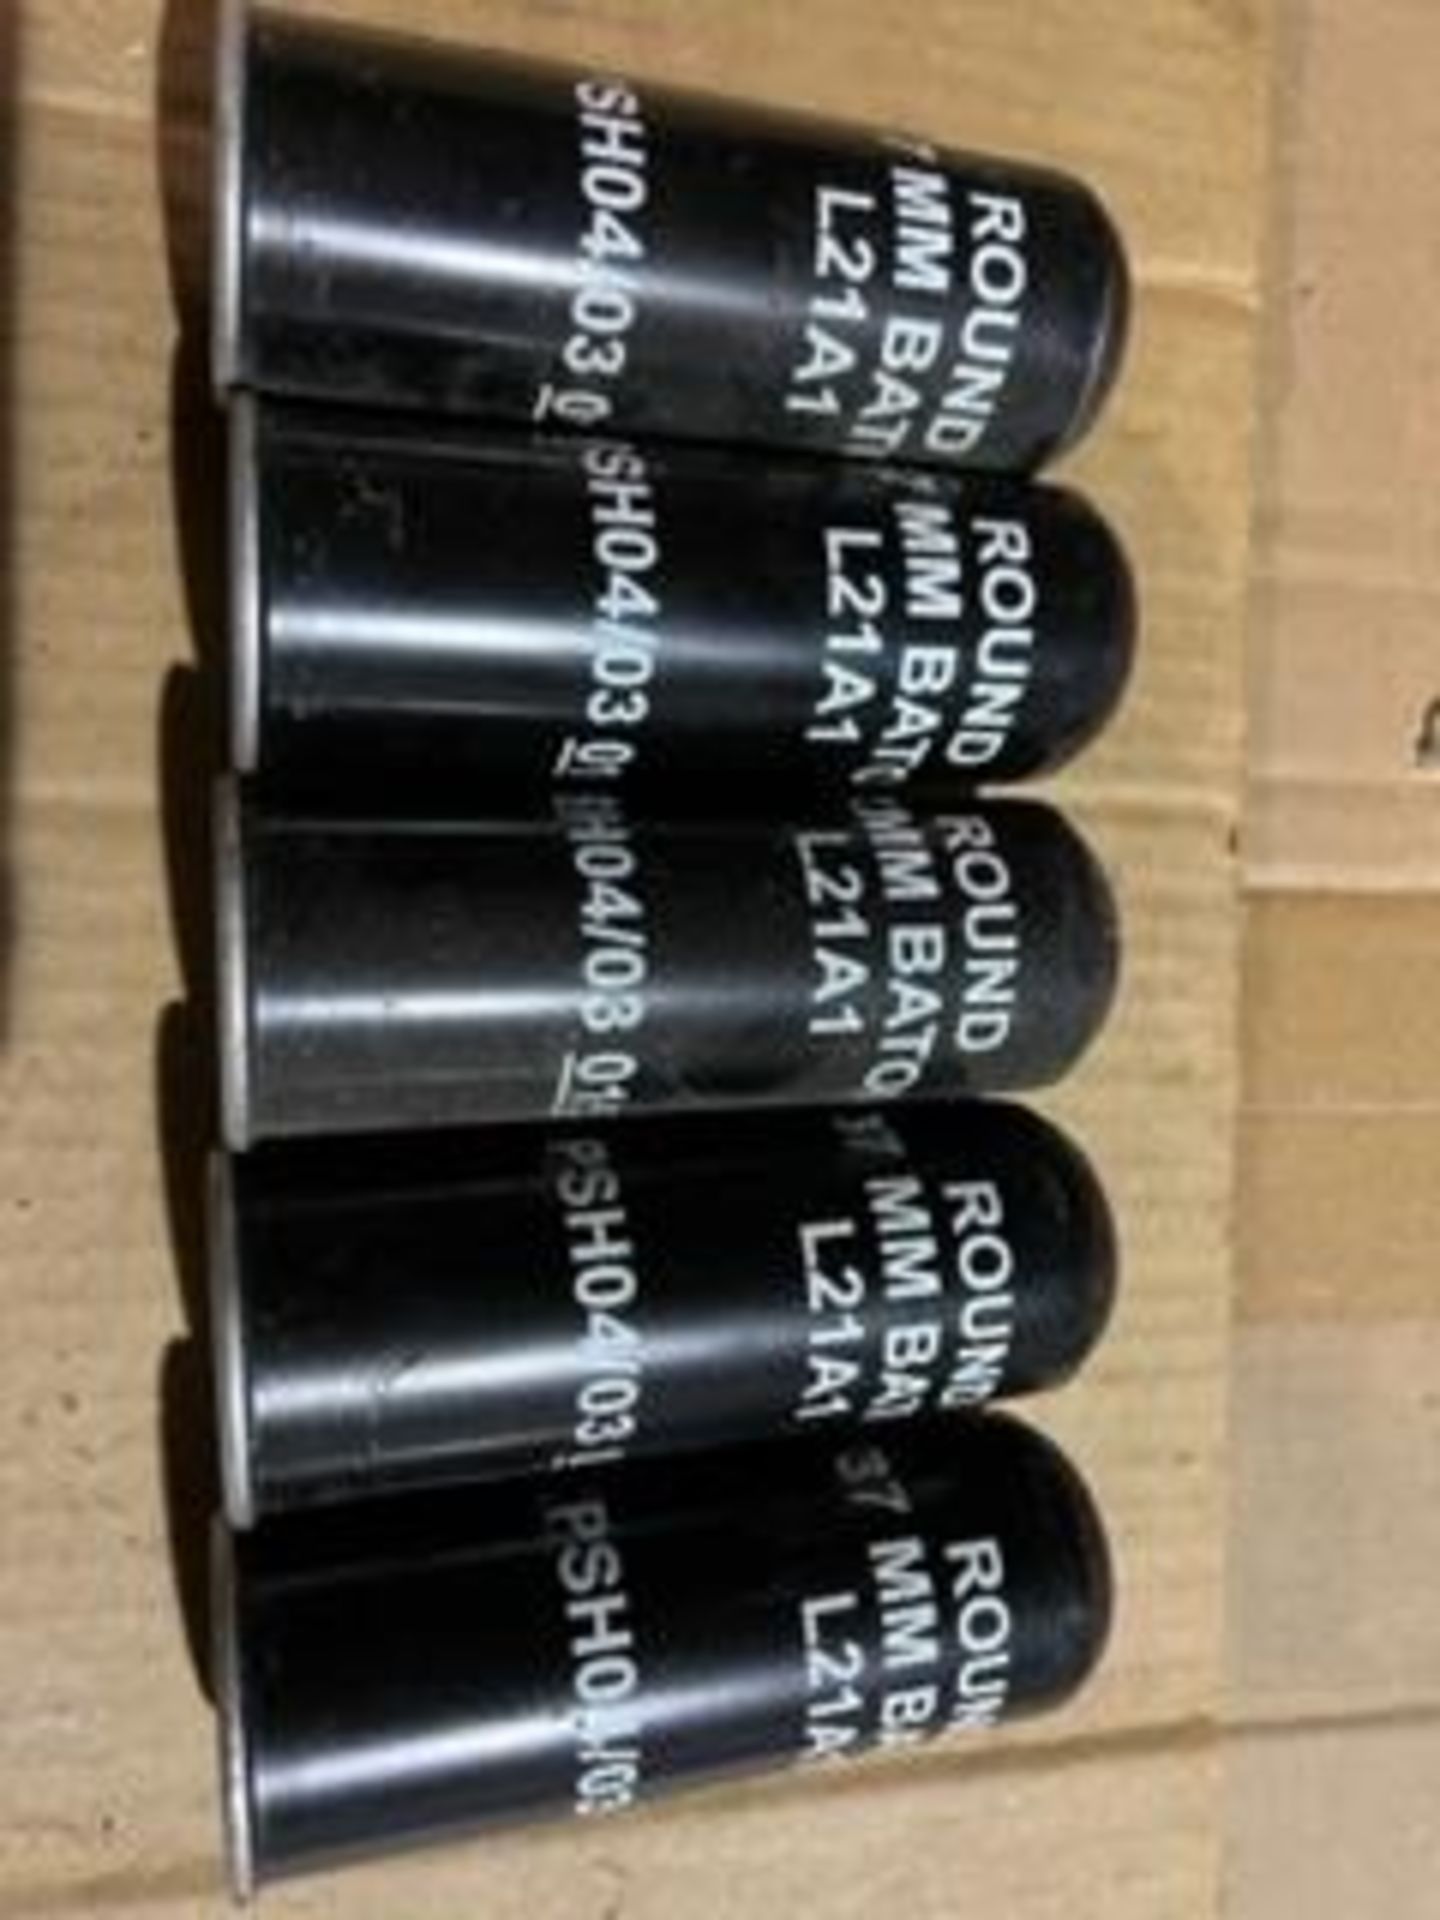 5 x Inert L12A1 37 MM Rubber Baton Rounds - Image 5 of 5